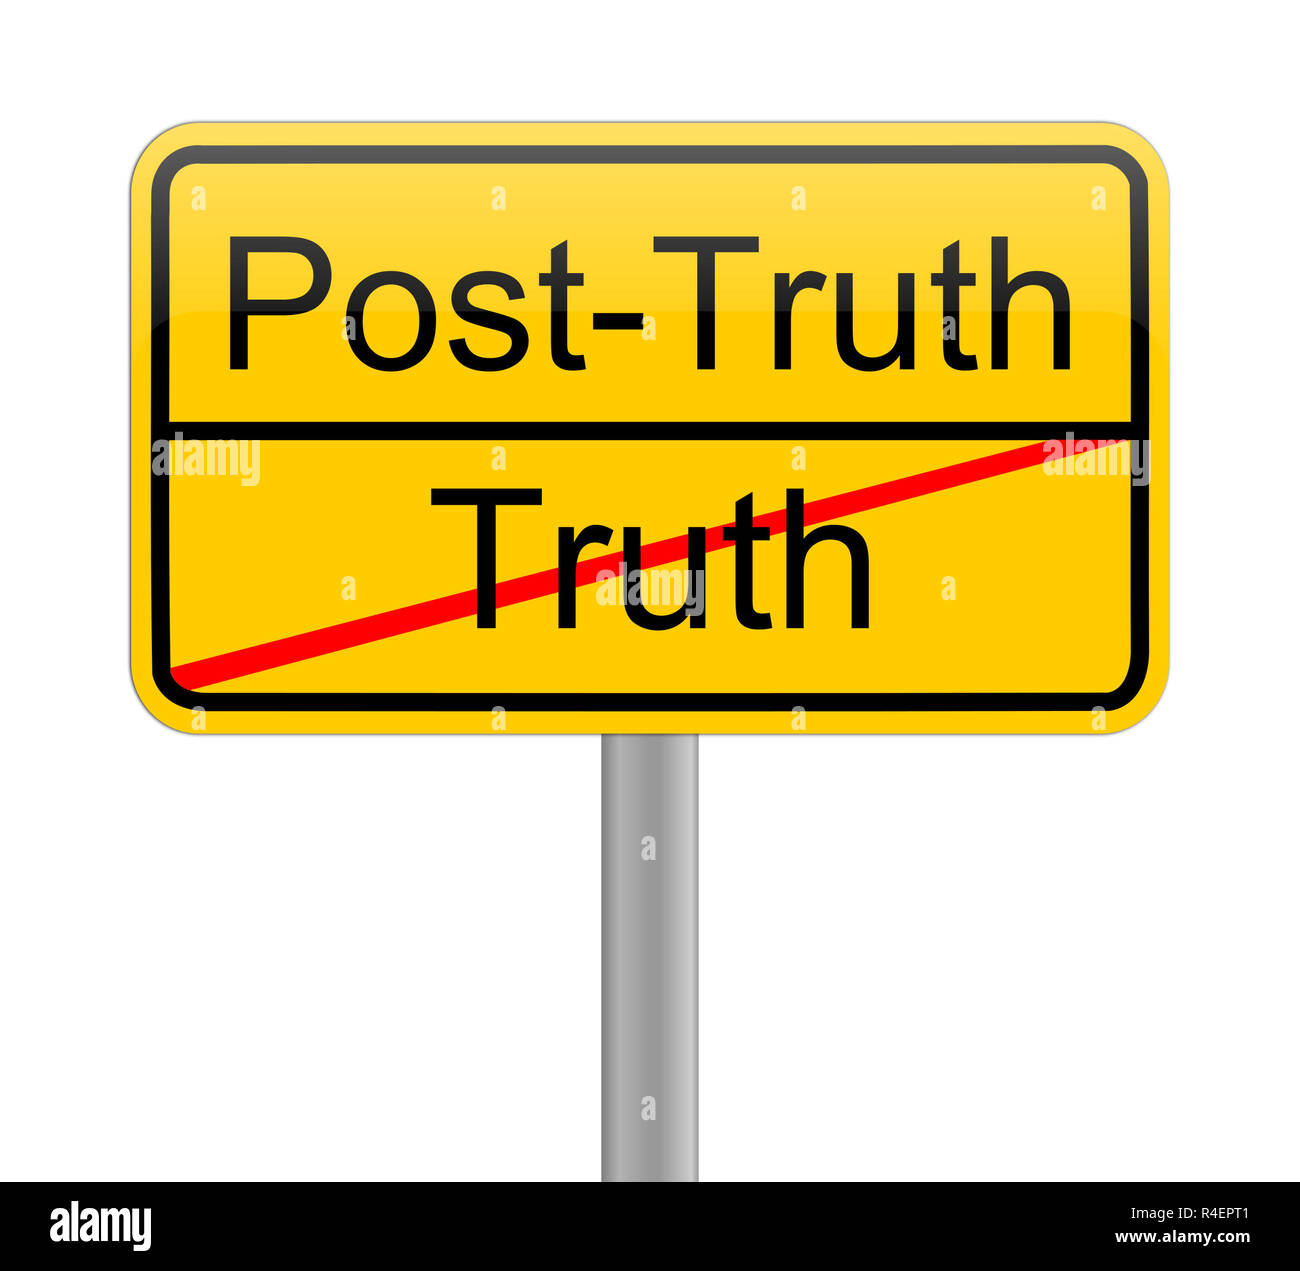 Post-Truth sign Stock Photo